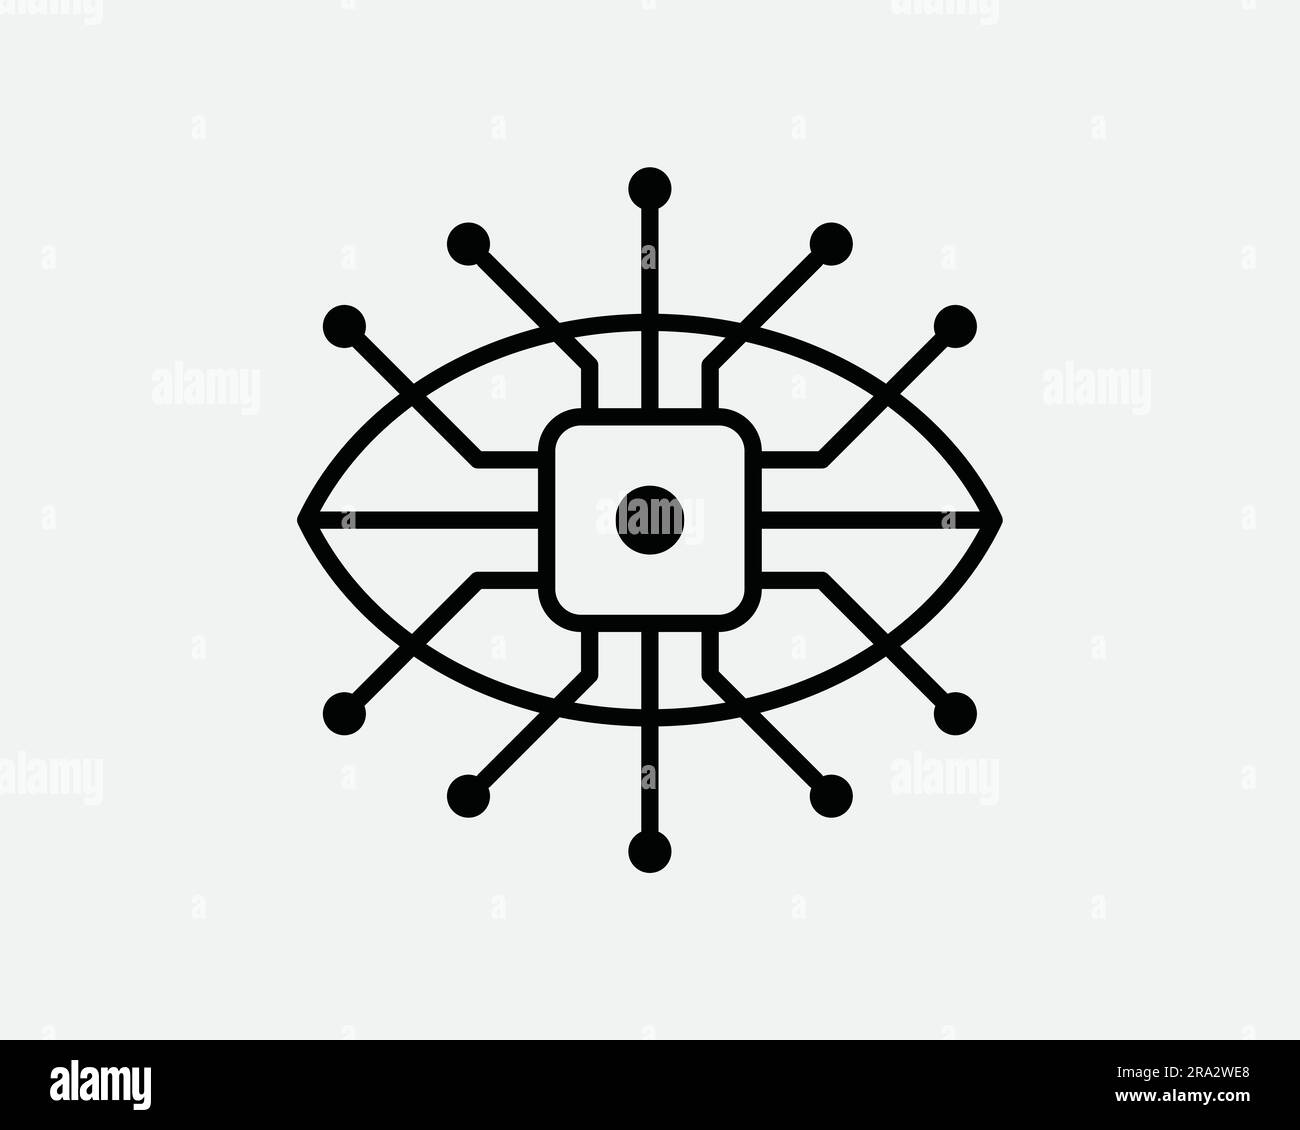 AI Vision Icon. Artificial Intelligence Robot Eye Computer Chip Technology Cyber Tech Data Black White Graphic Clipart Artwork Symbol Sign Vector EPS Stock Vector